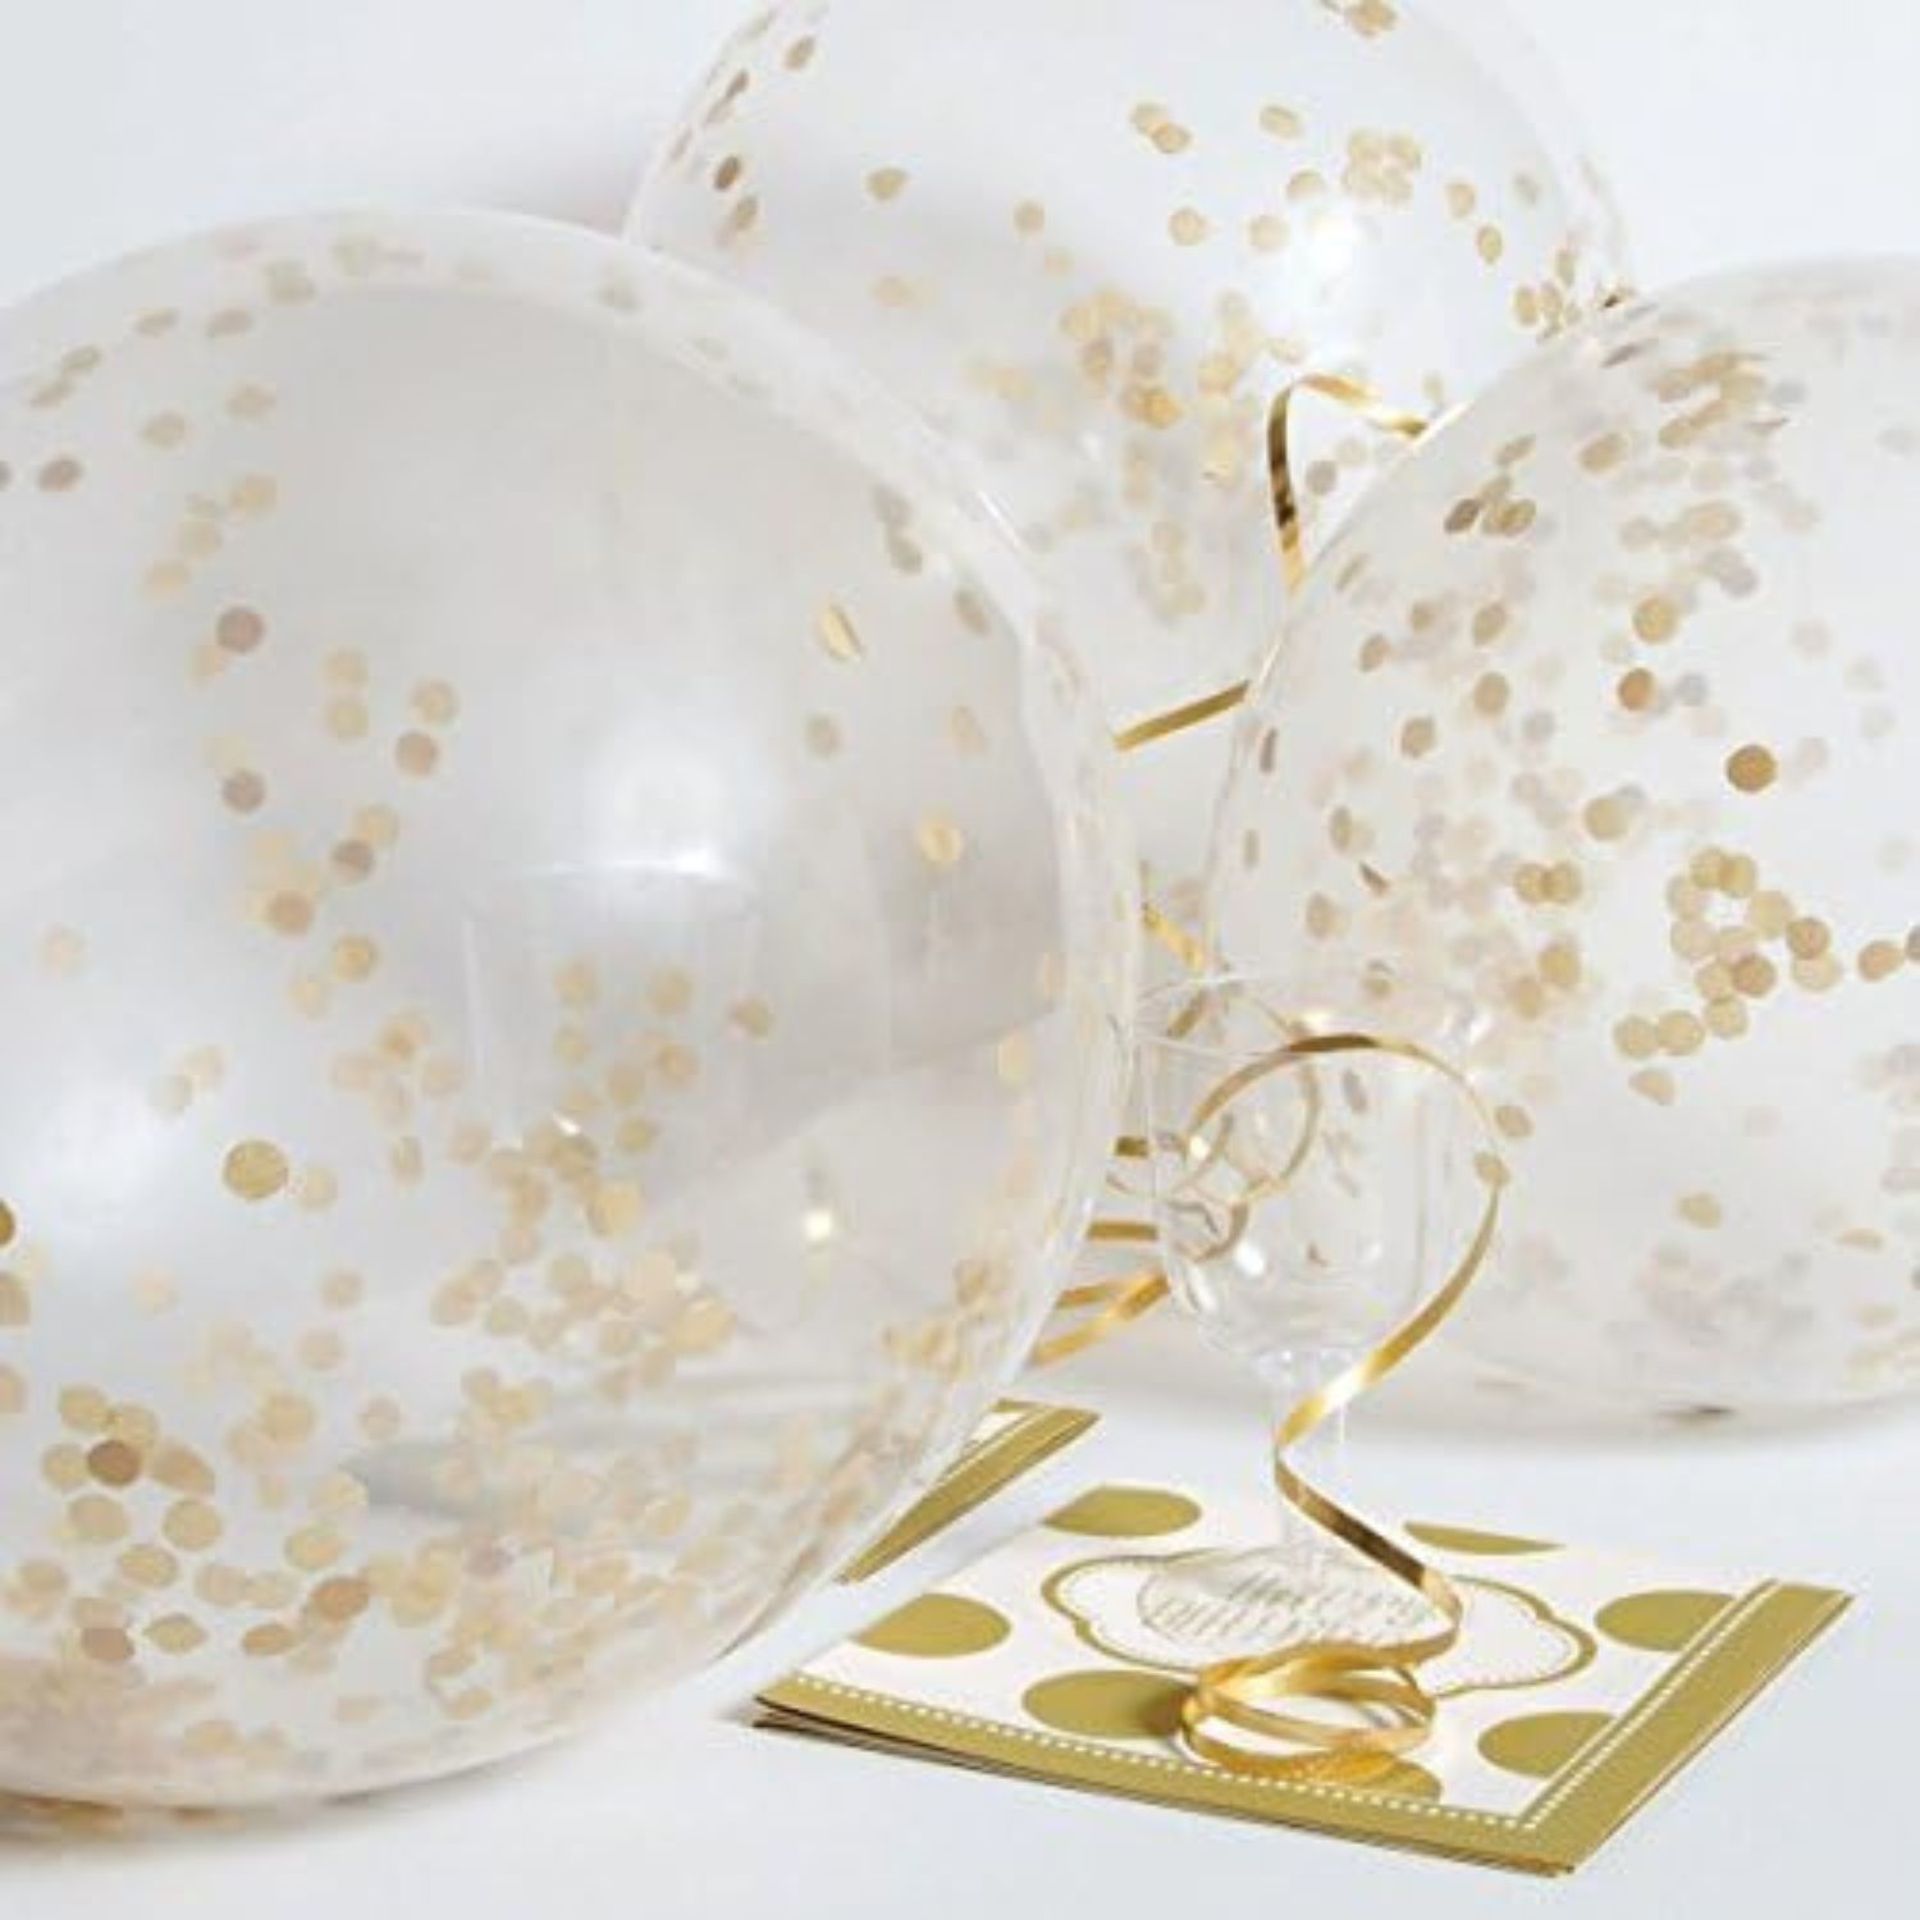 1000 PACKS OF LATEX SILVER AND GOLD CONFETTI BALLOONS, 12IN, 6CT, RRP £10,000 - Image 3 of 7